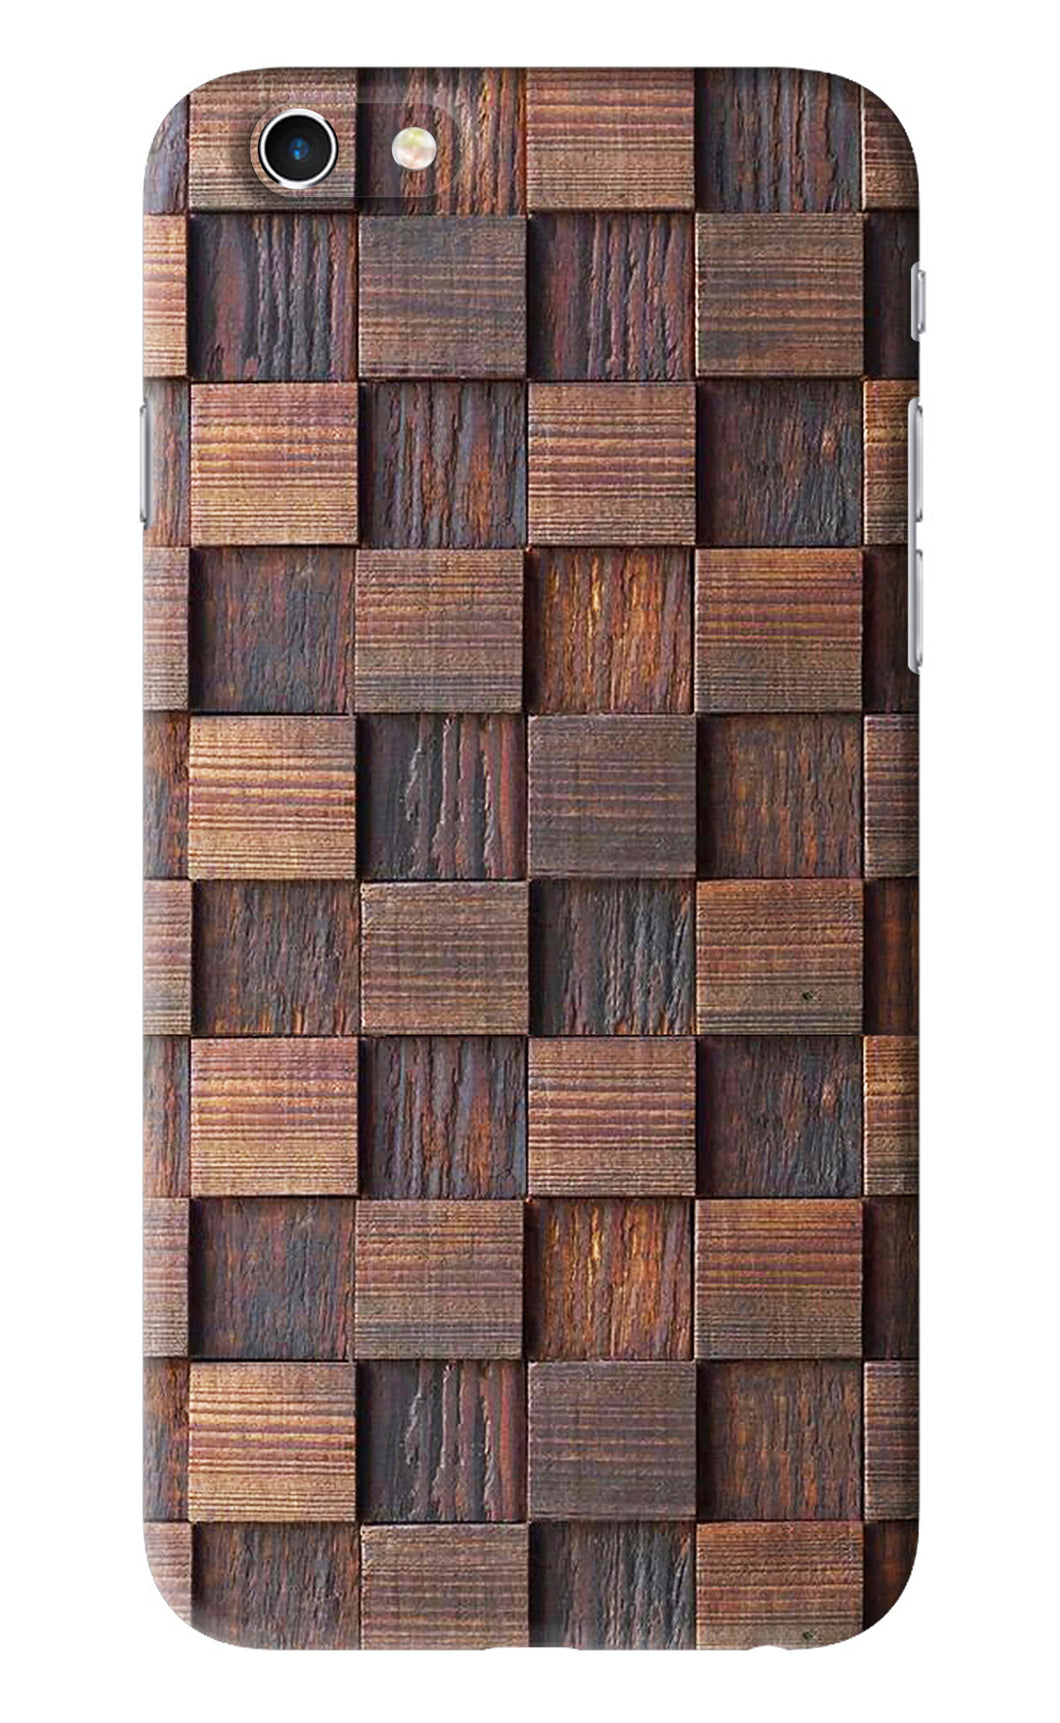 Wooden Cube Design iPhone 6S Back Skin Wrap